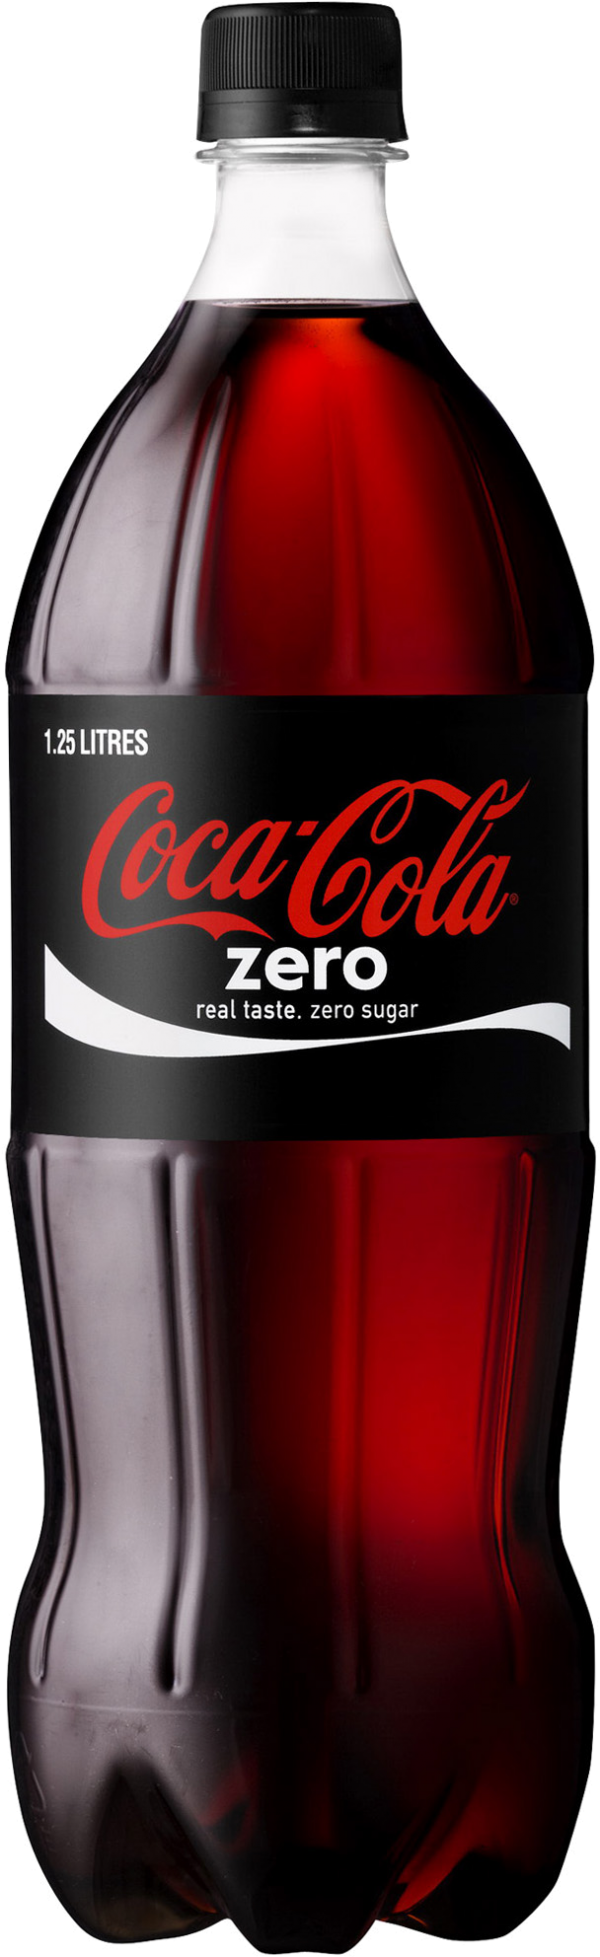 cocacola png free download 17